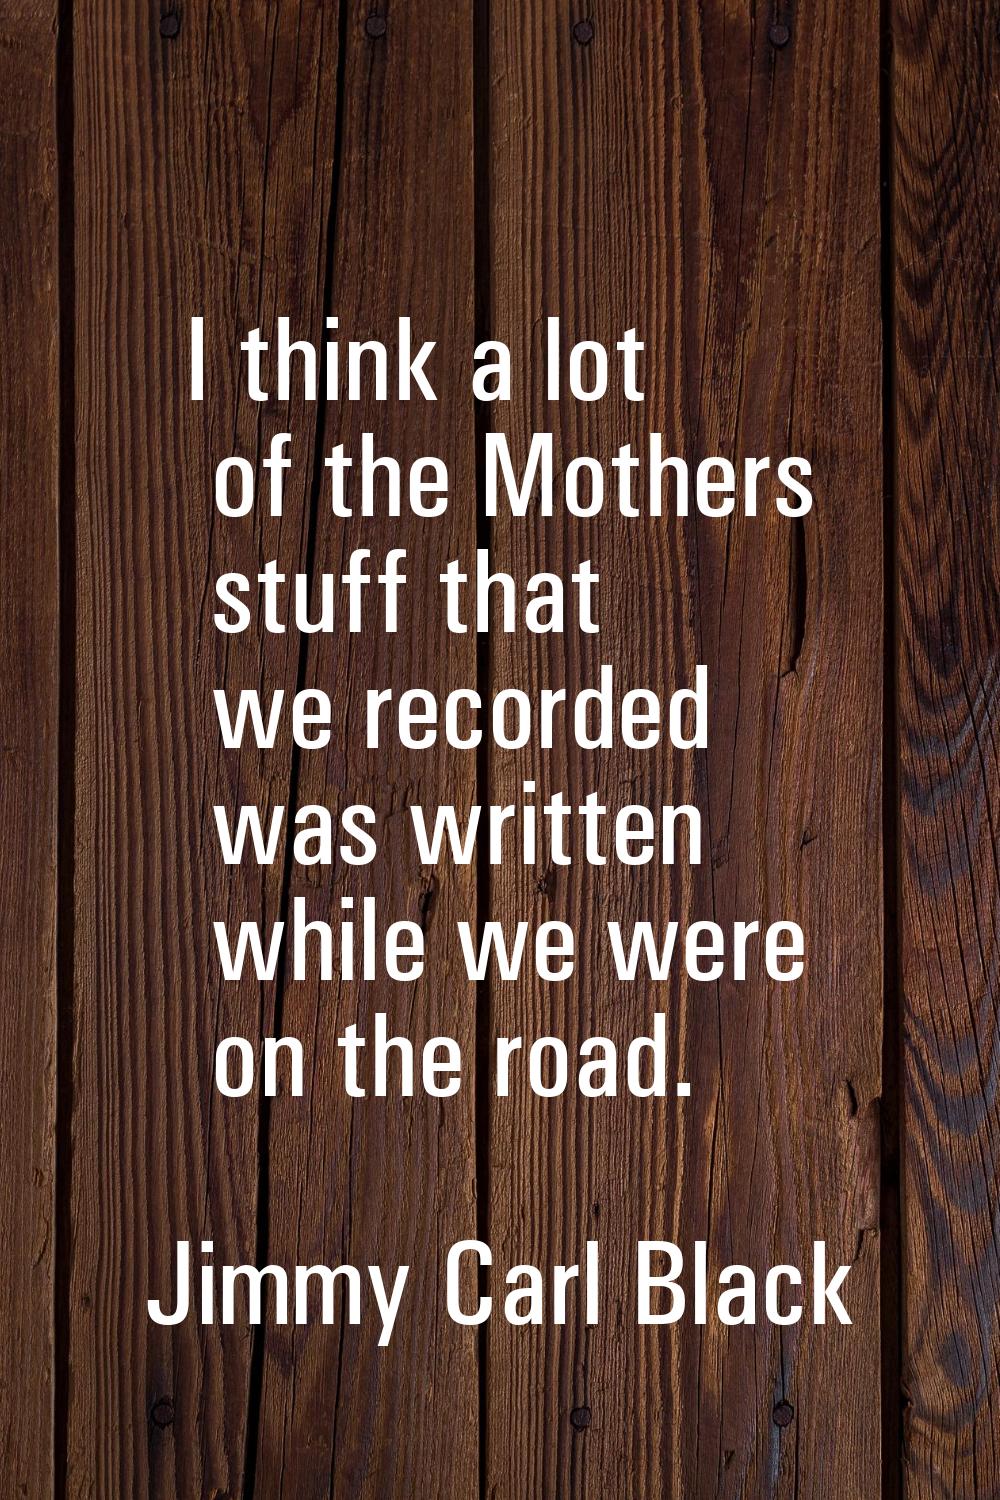 I think a lot of the Mothers stuff that we recorded was written while we were on the road.